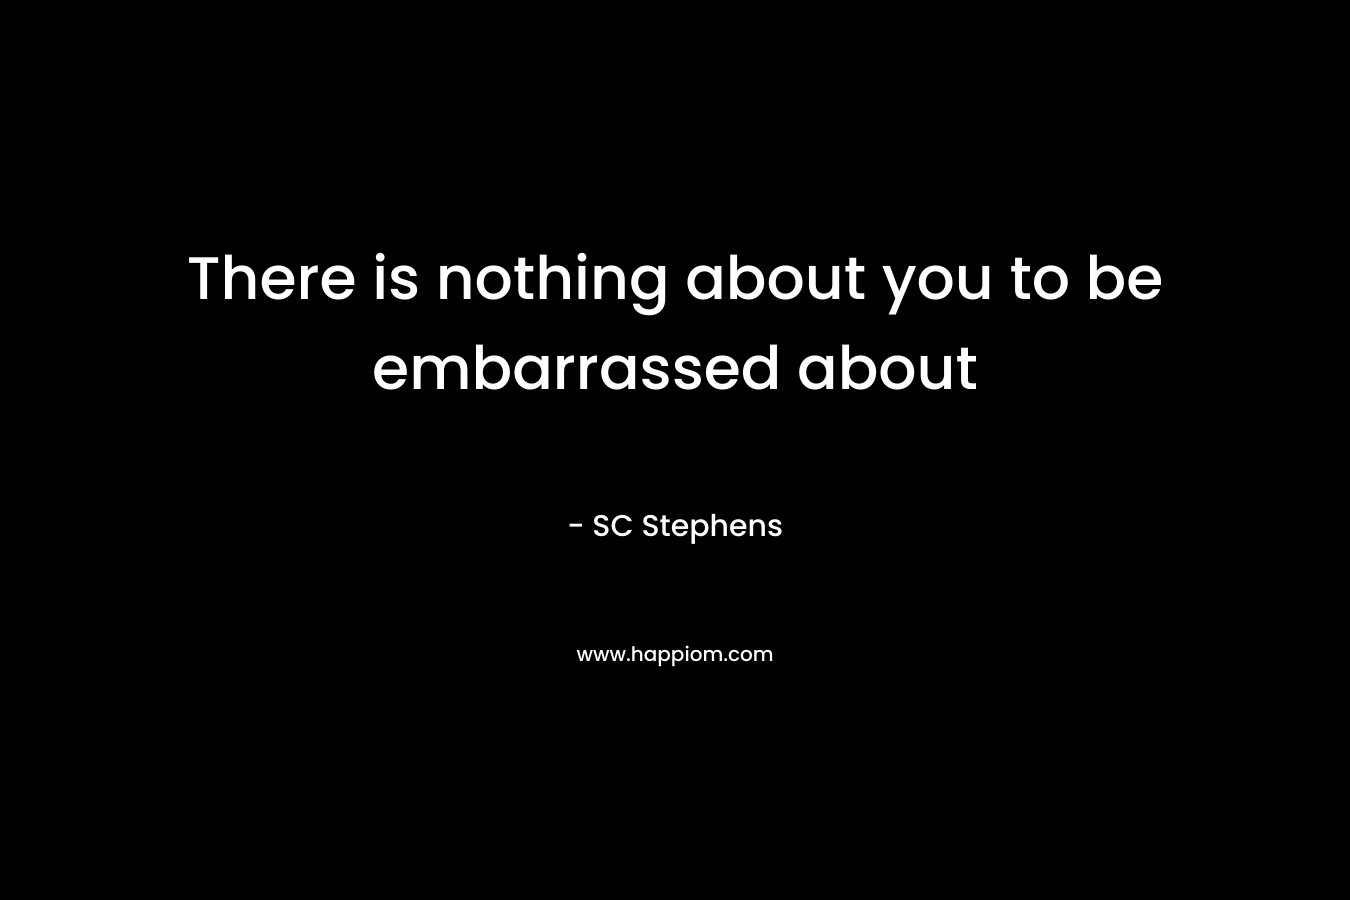 There is nothing about you to be embarrassed about – SC Stephens